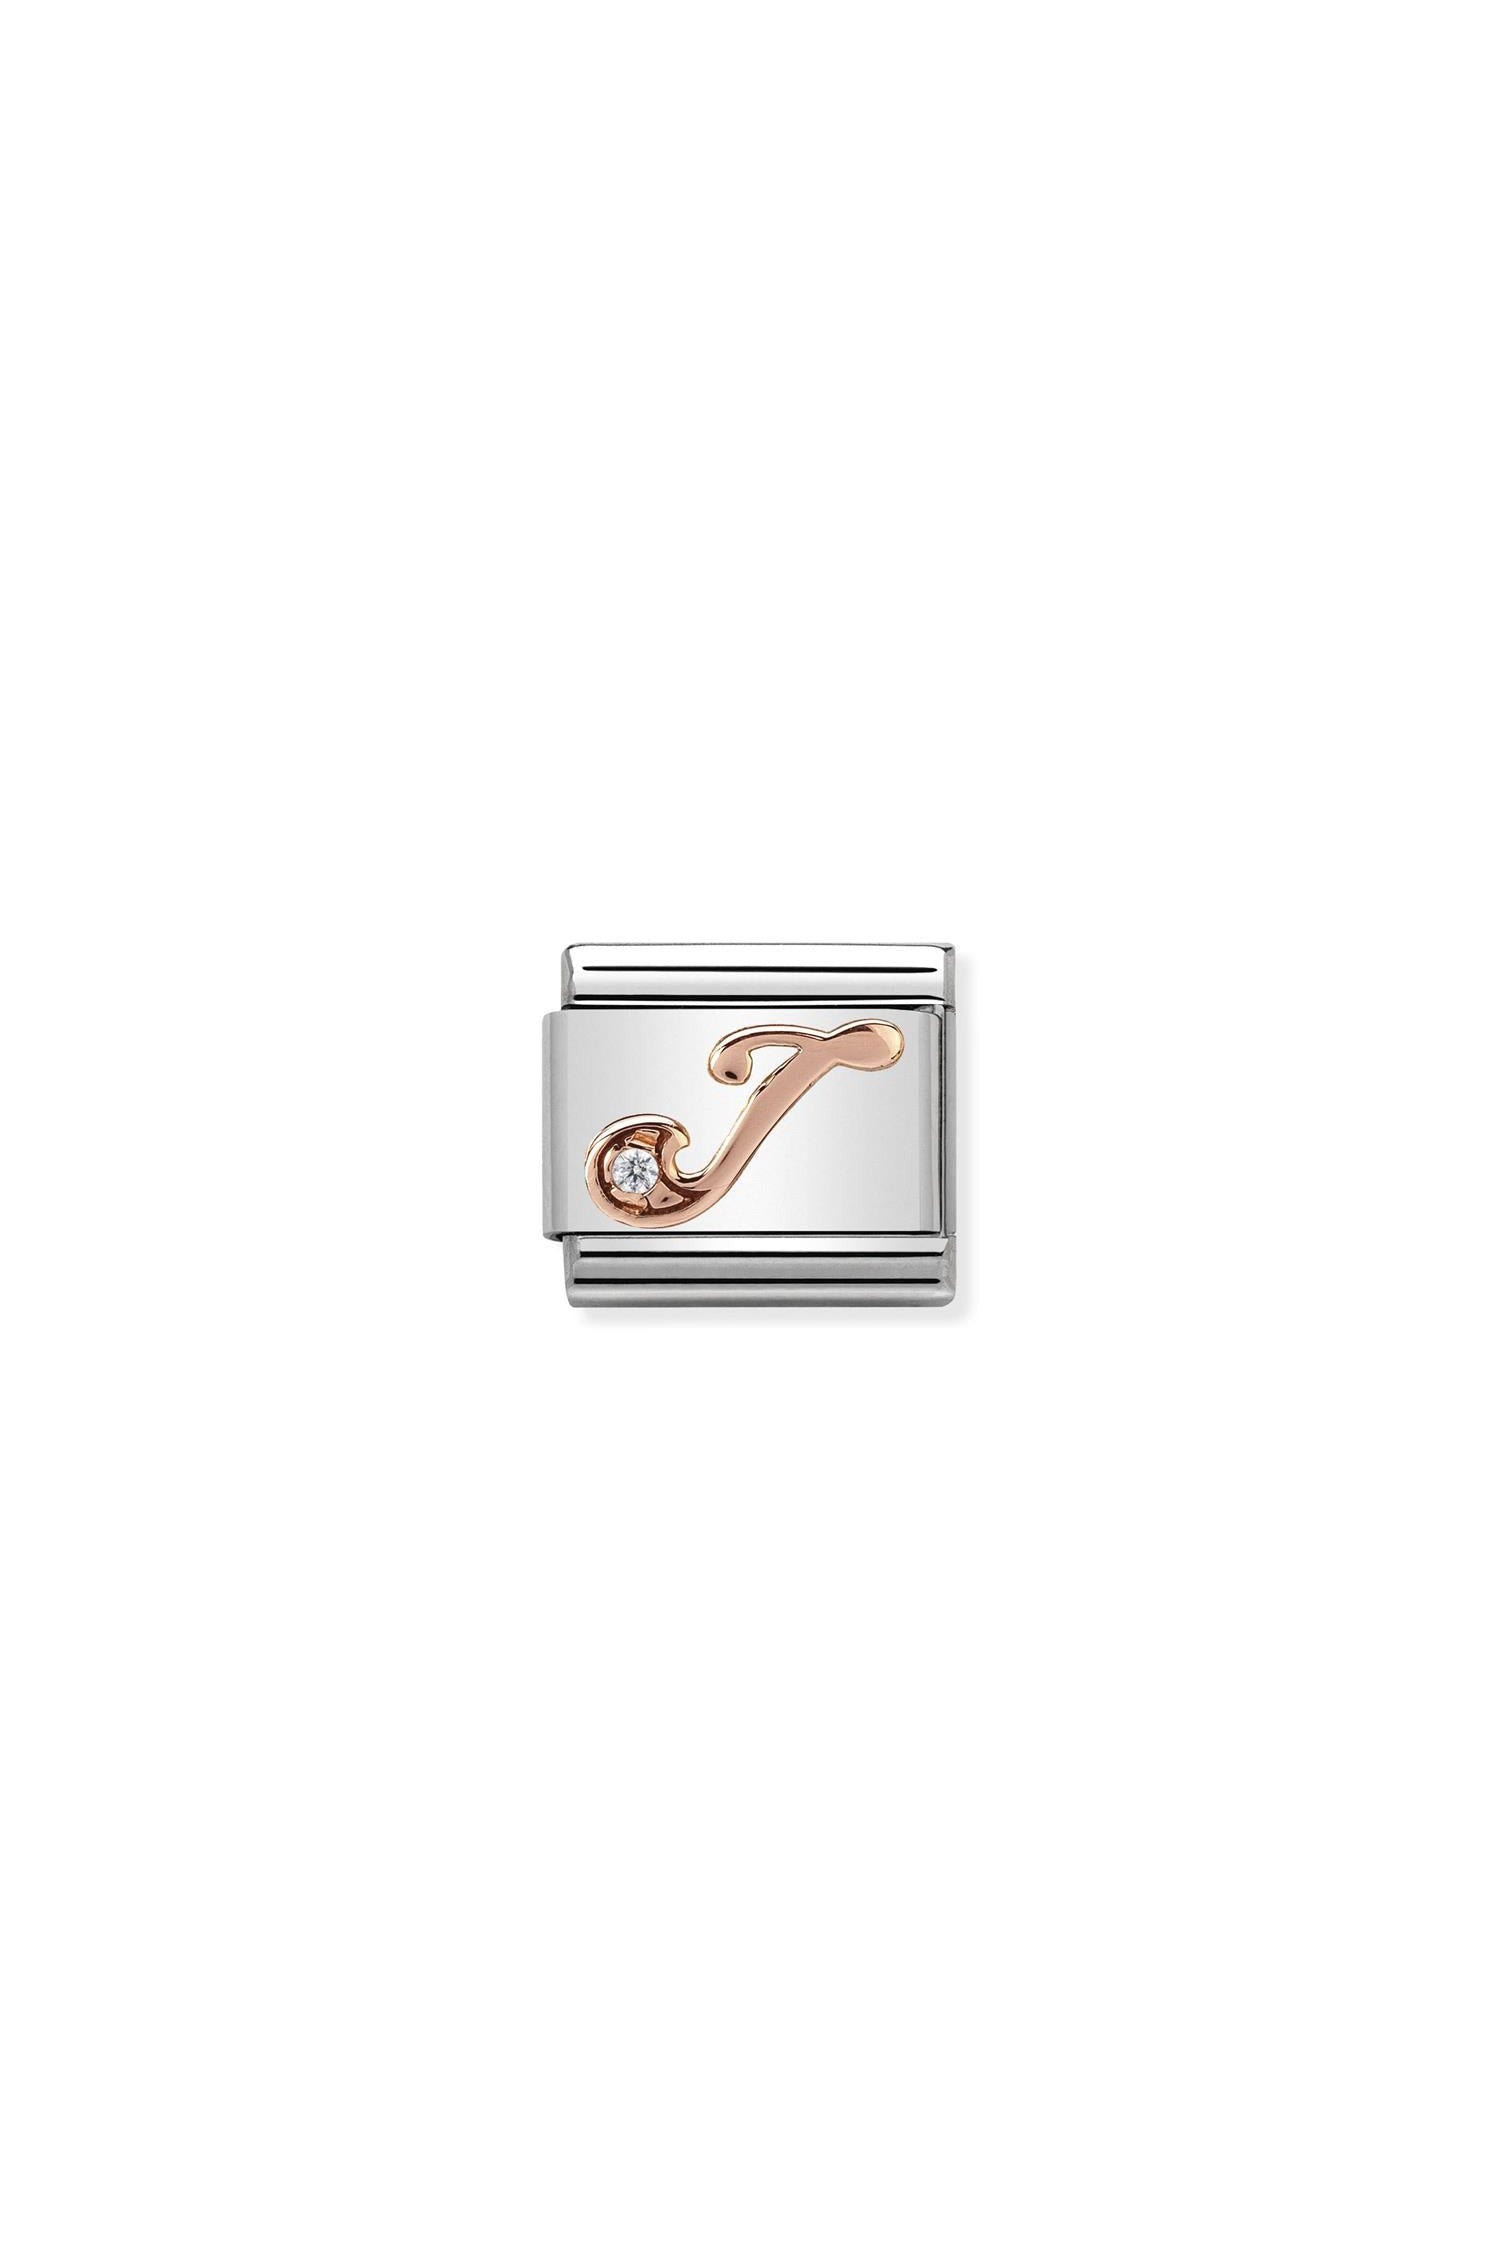 LETTERS 9k rose gold and CZ J